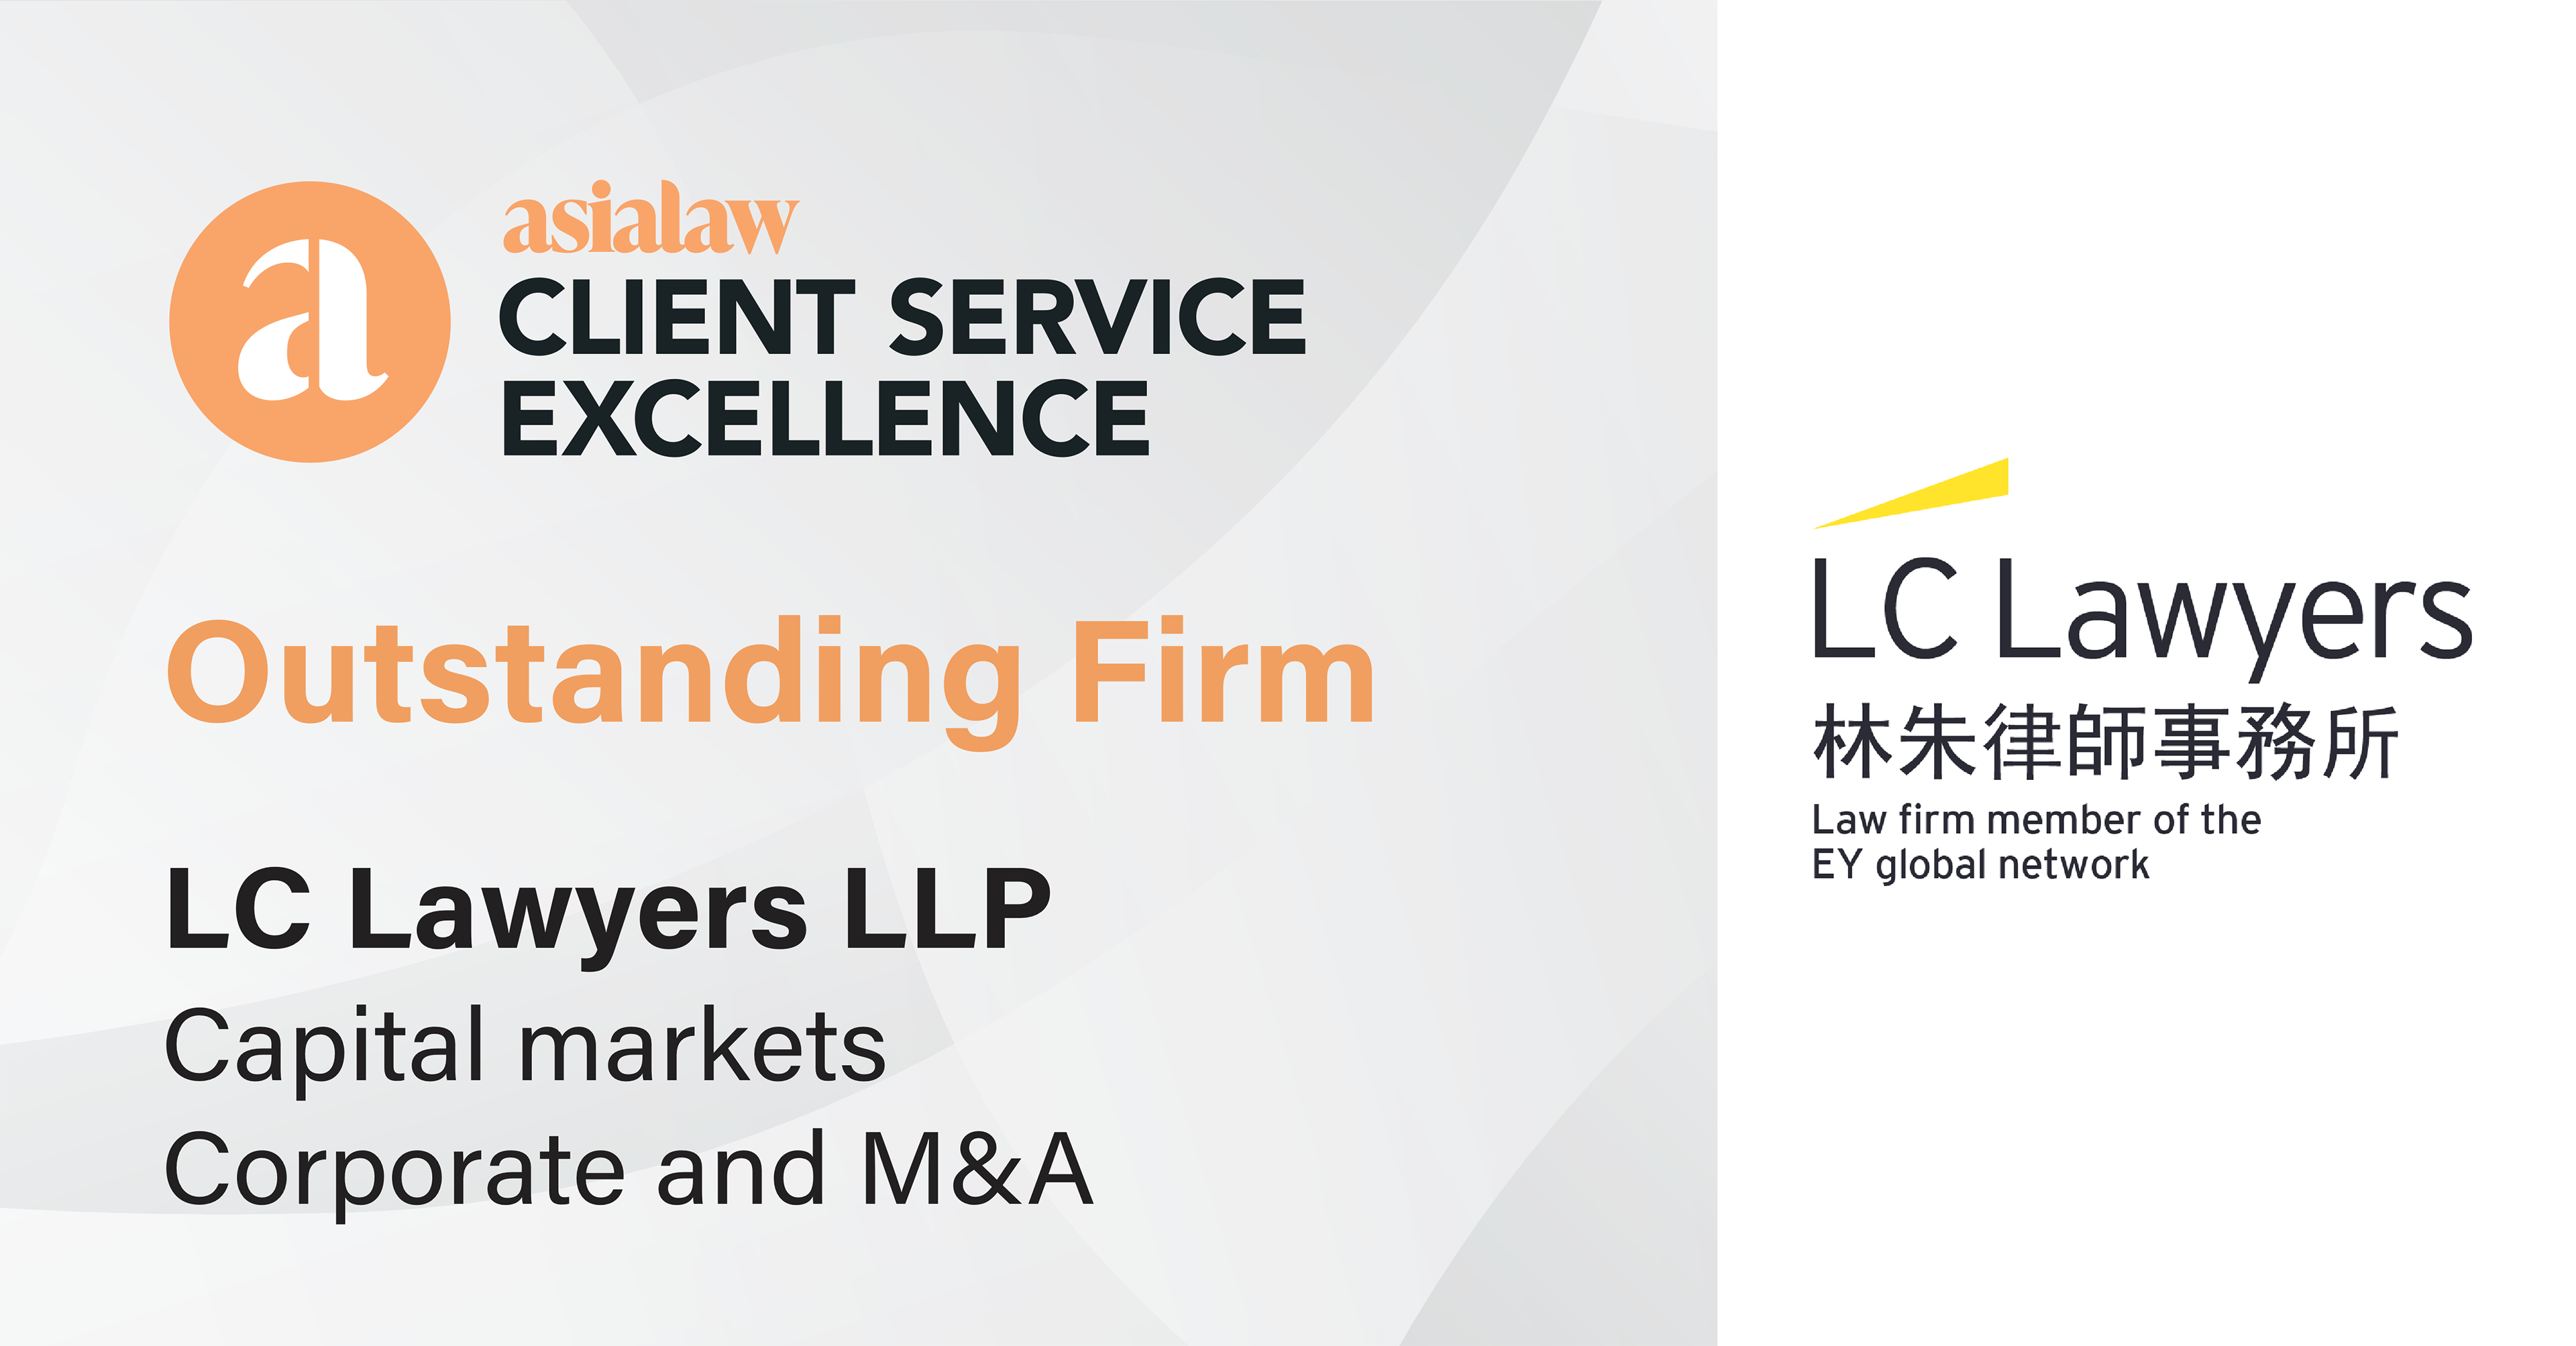 Outstanding Firm by asialaw Client Service Excellence 2021